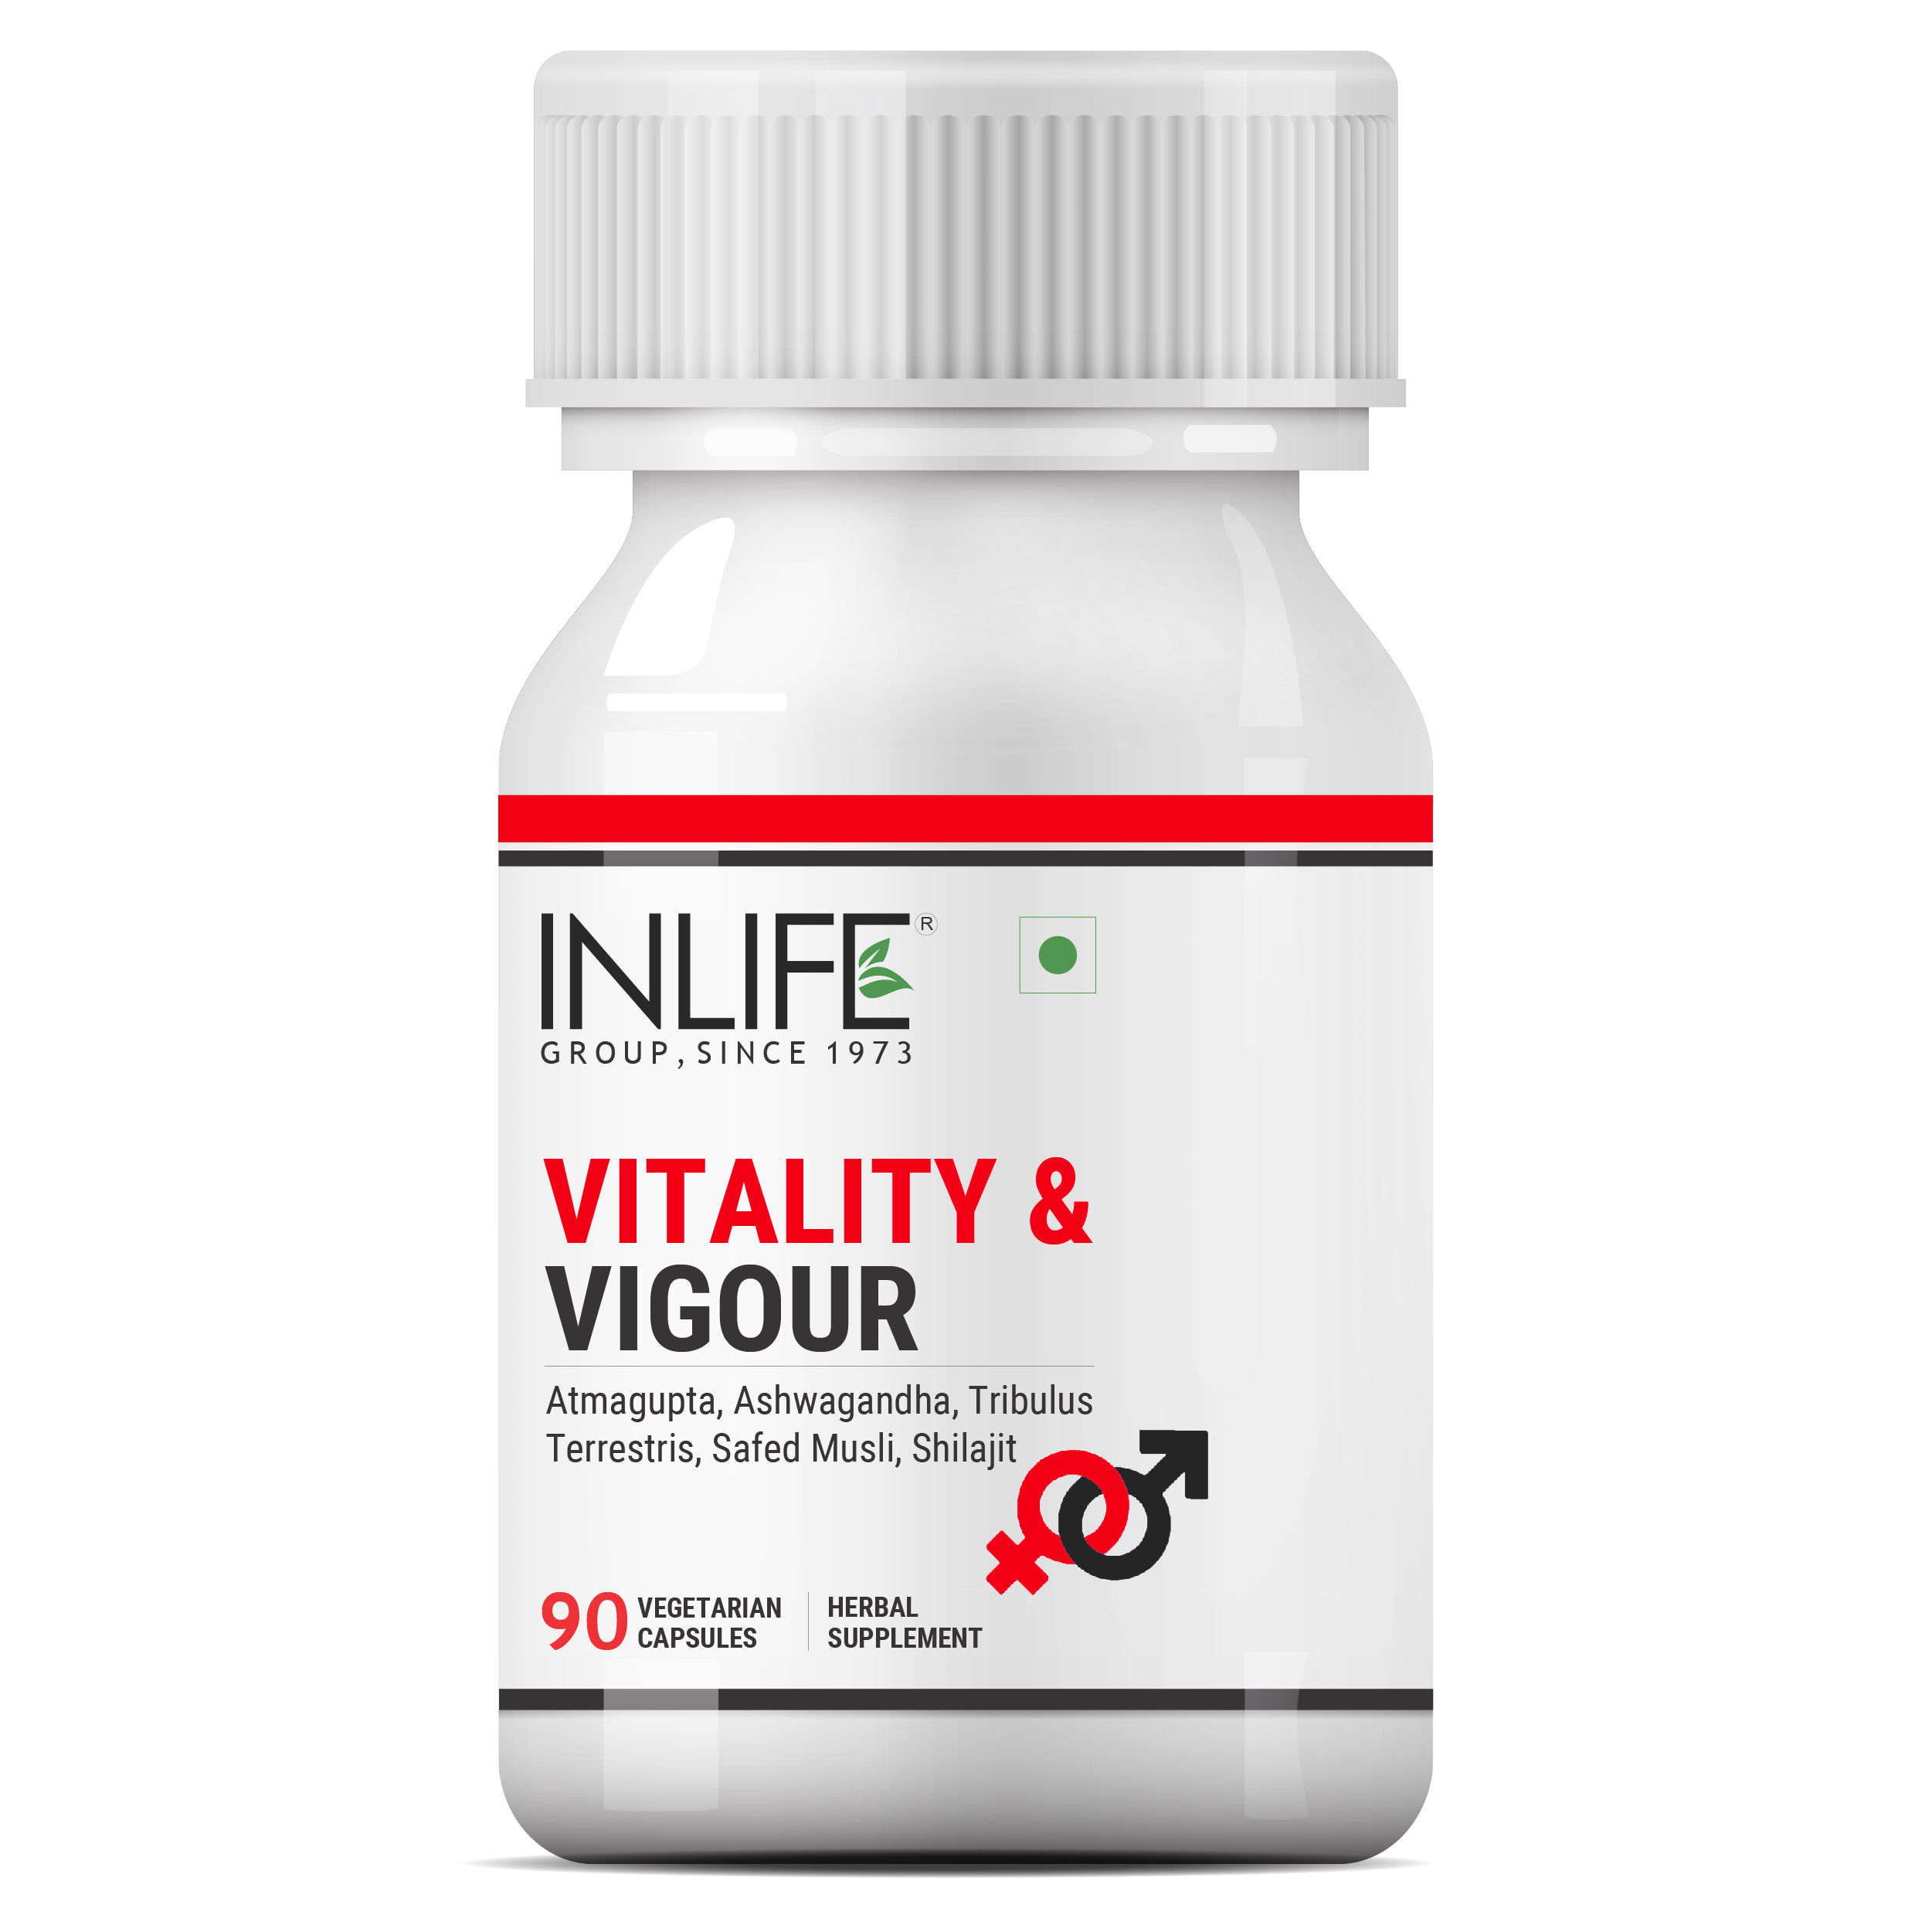 Inlife Vitality and Vigour Supplement for 90 Vegetarian Capsules